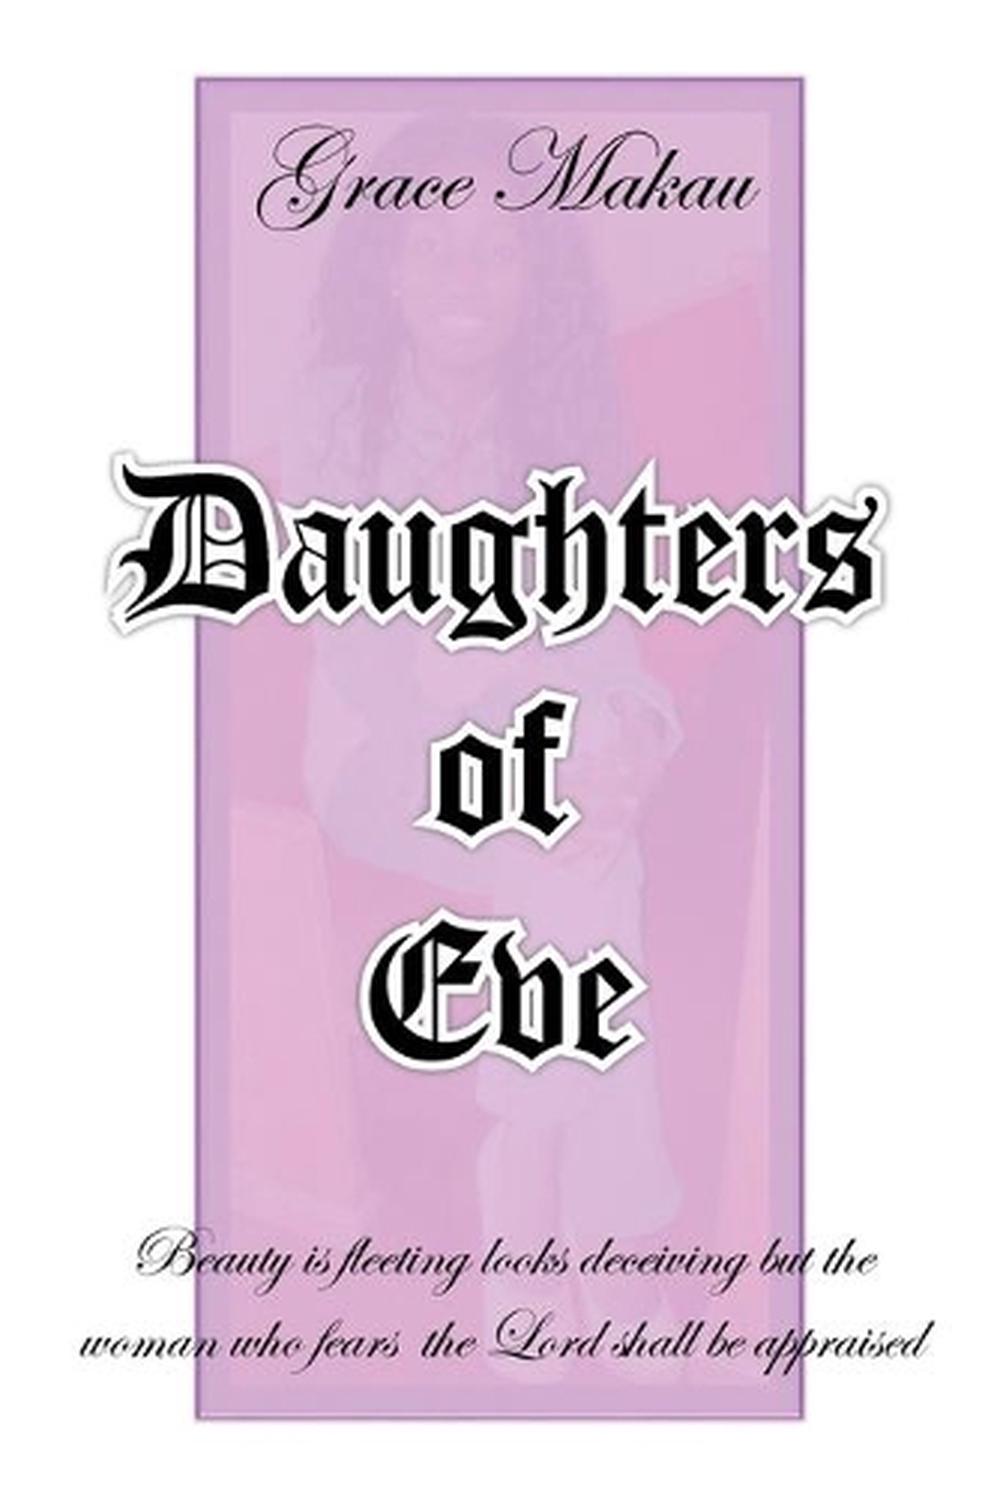 three daughters of eve review